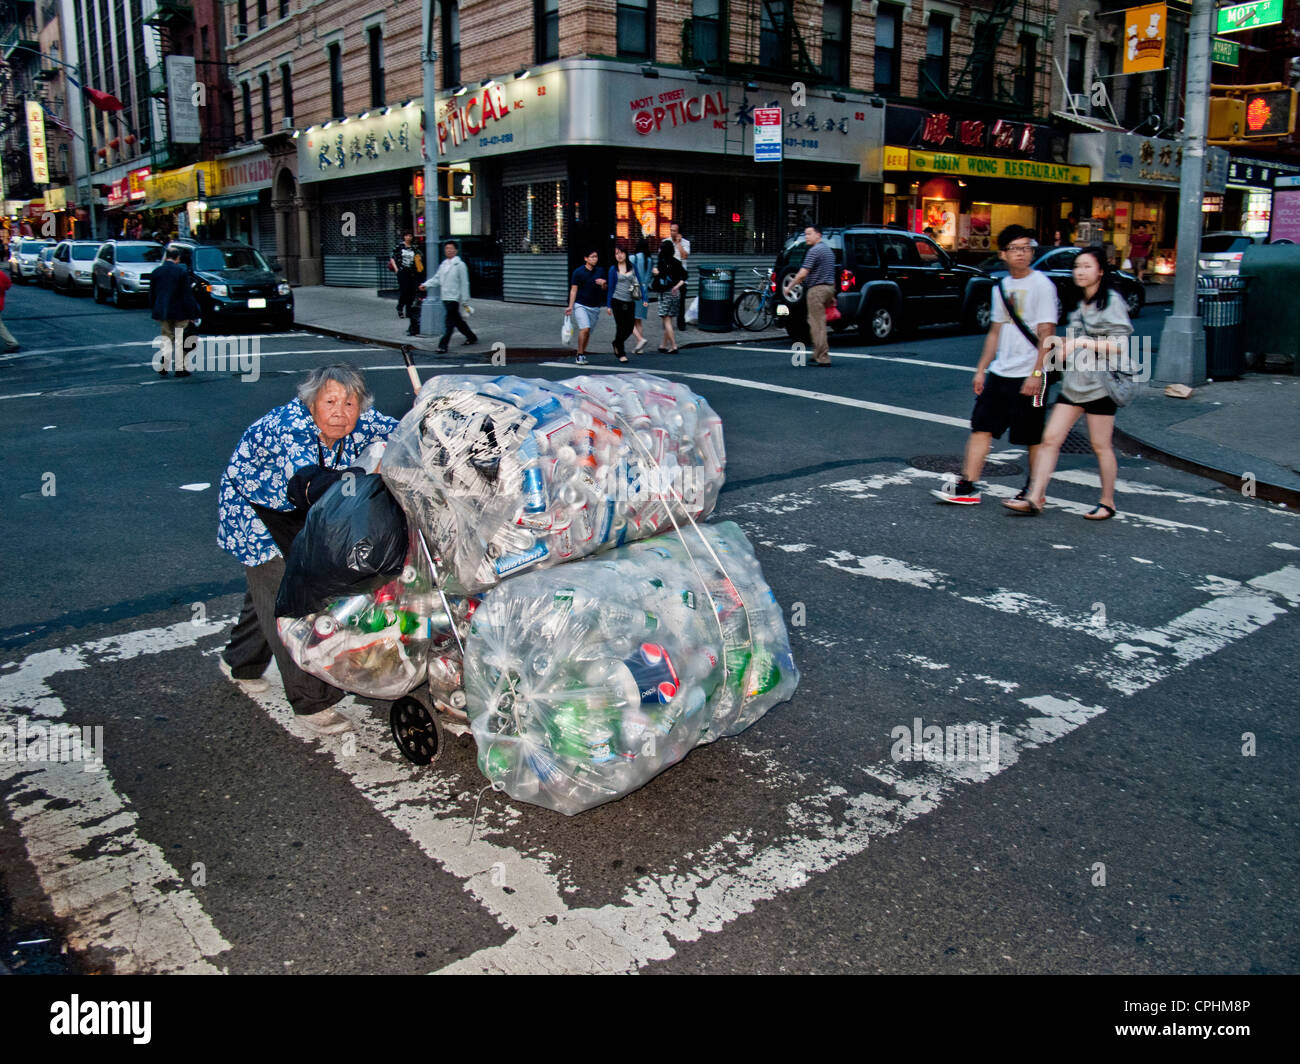 A poor elderly Chinese woman collects cans and bottles for deposit money in New York City's Chinatown Stock Photo